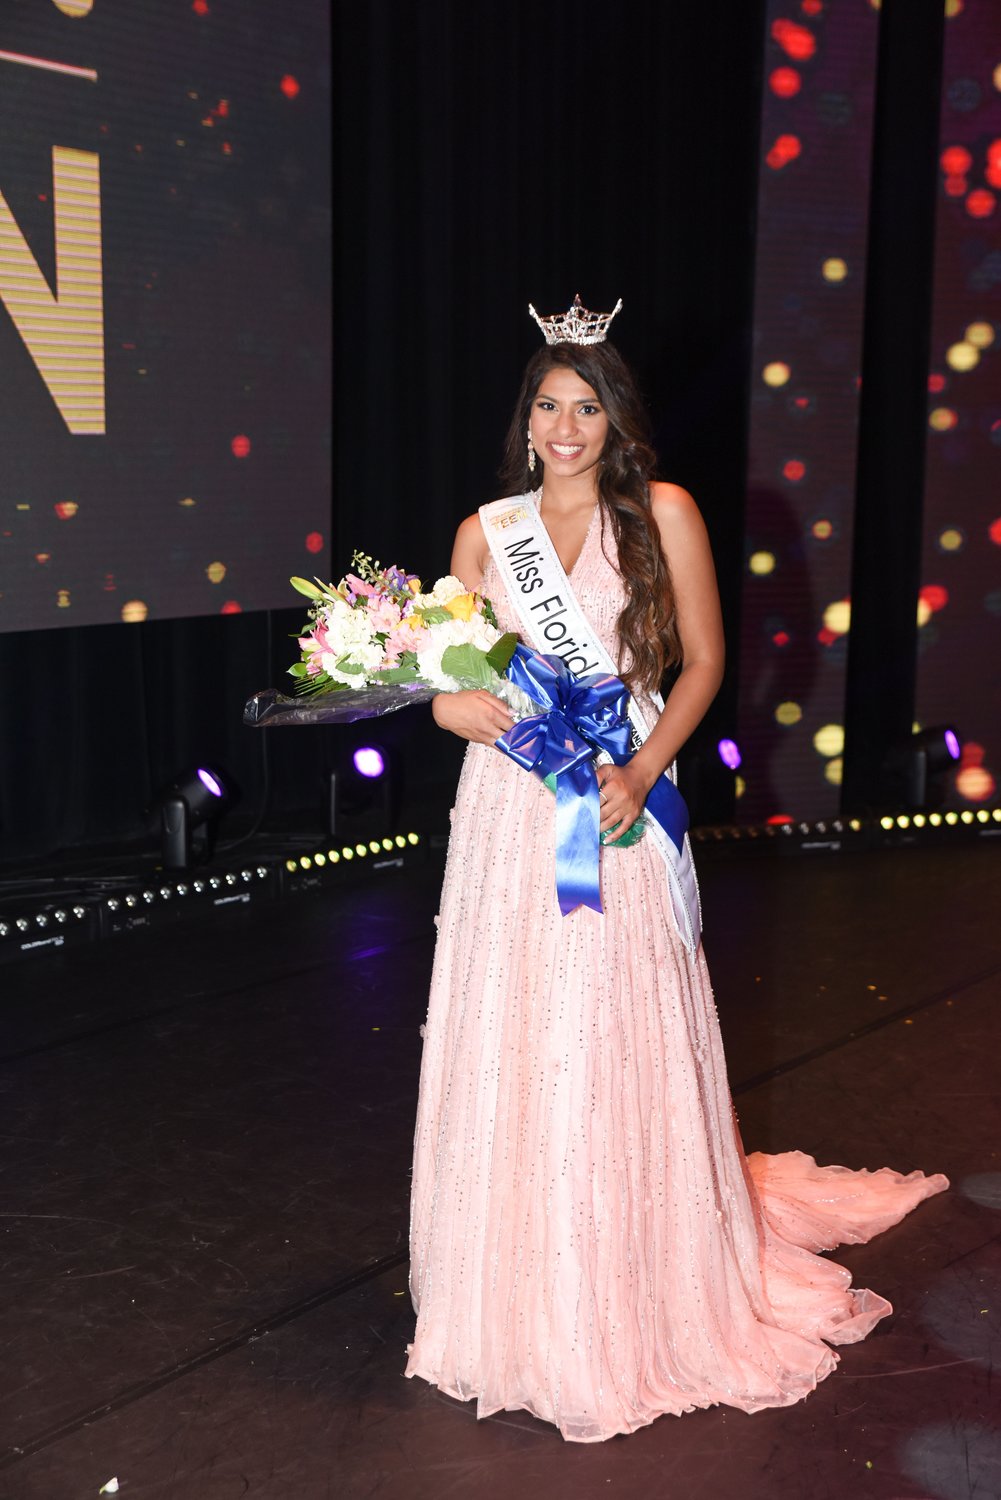 Aashna Shah is Miss Florida’s Outstanding Teen for 2022.